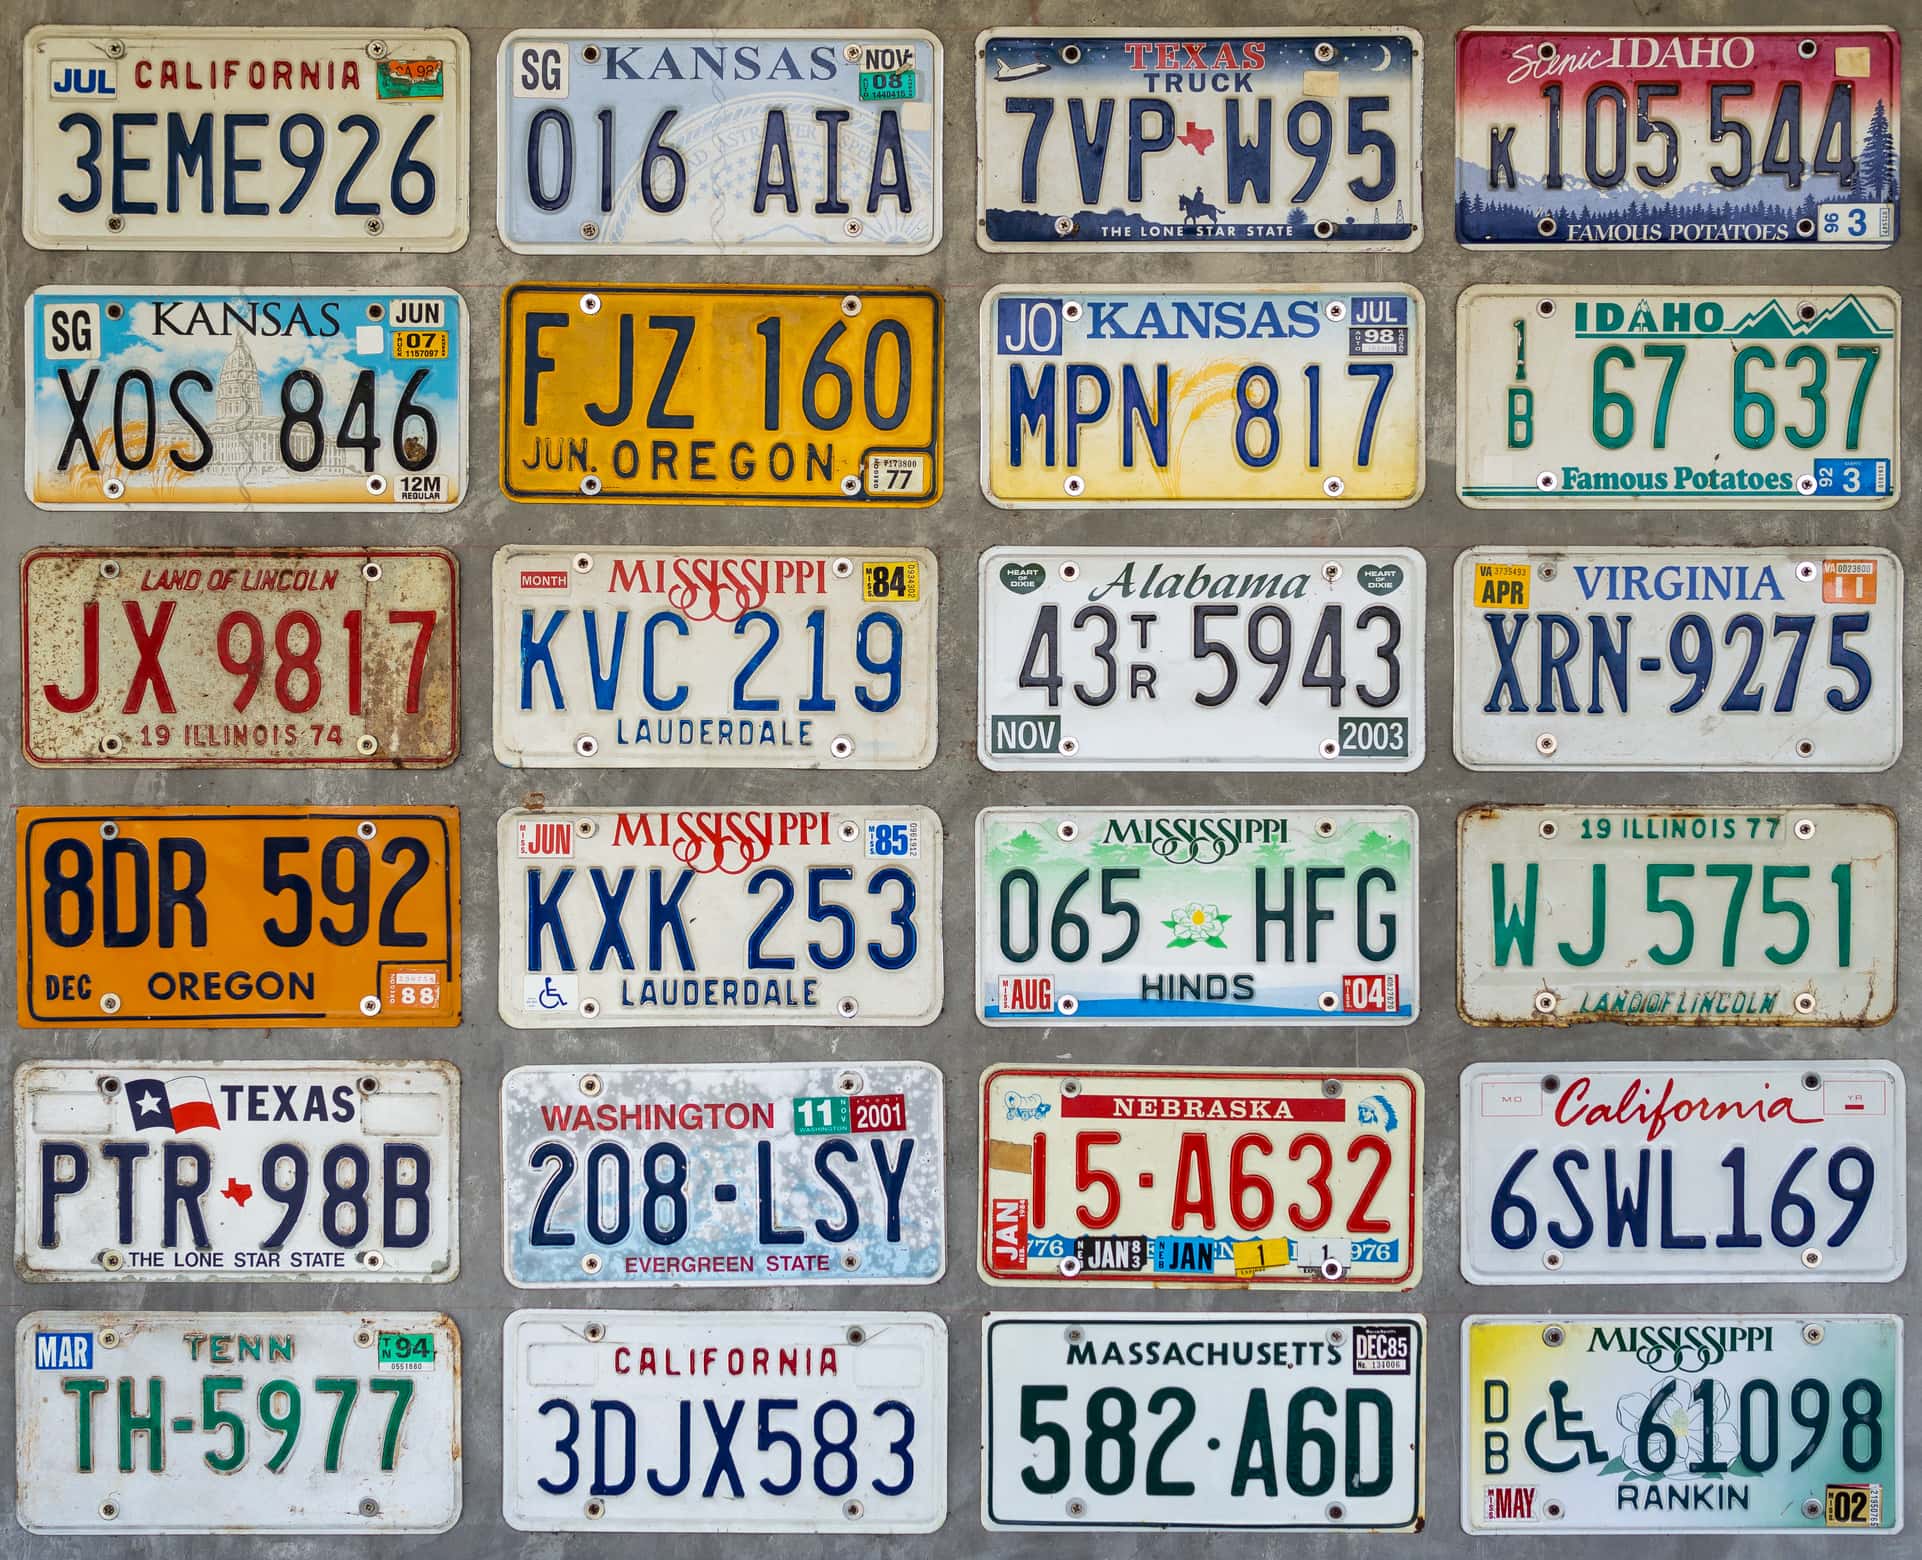 A collection of altered license plates on a wall representing road safety preservation efforts.